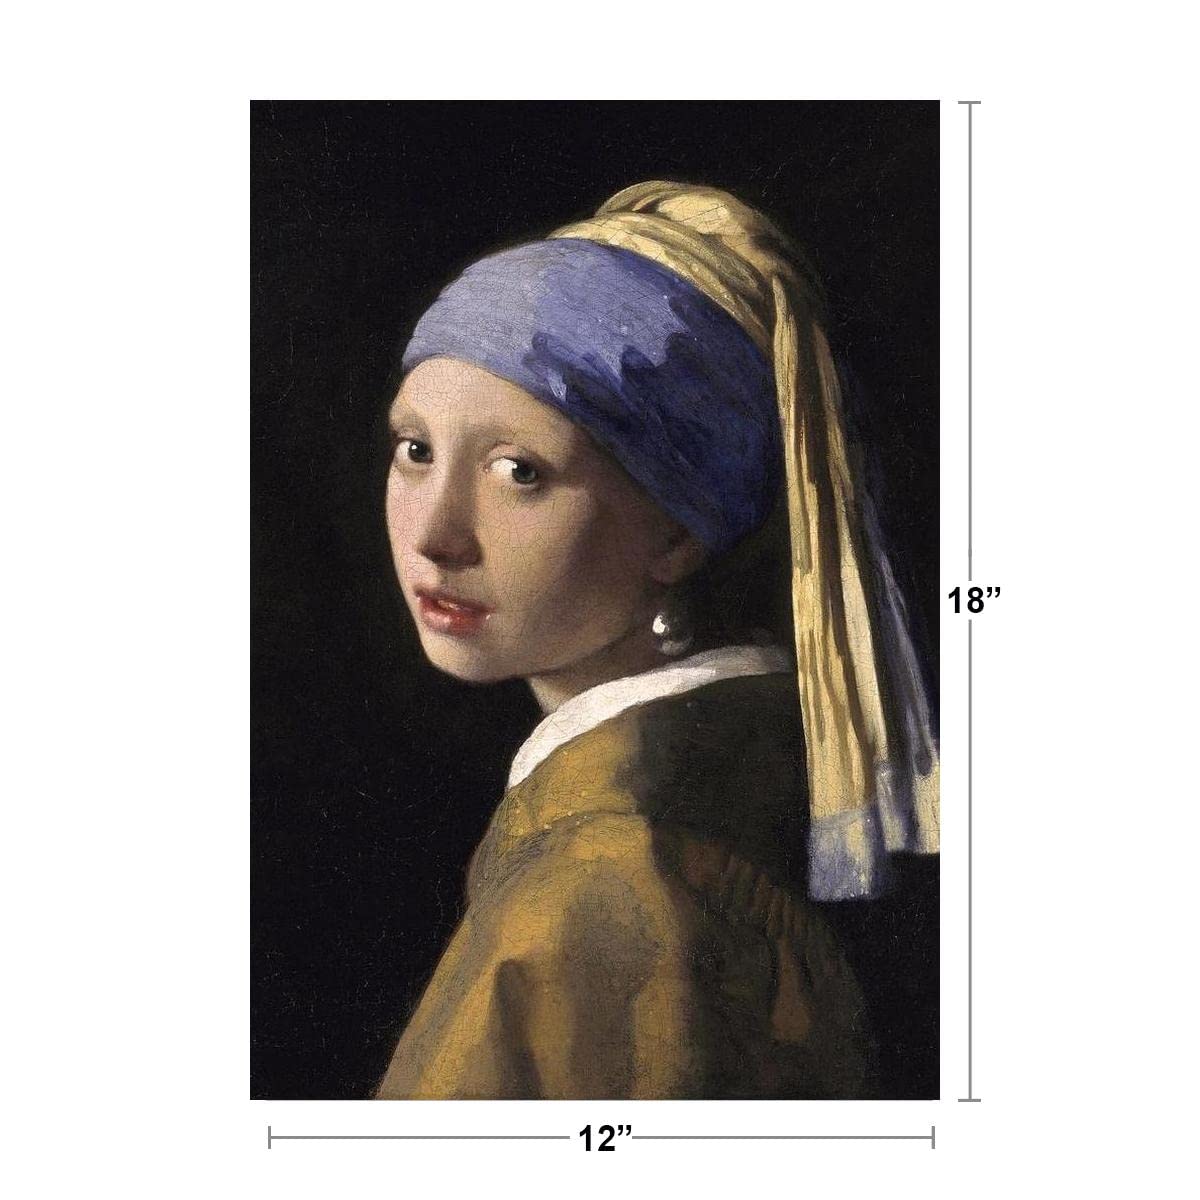 Johannes Vermeer Girl with a Pearl Earring Girl Oil Painting Vermeer Pearl Art Print Fine Art Wall Decor Woman Portrait Pearl Earring Scarf Painting Cool Wall Decor Art Print Poster 12x18